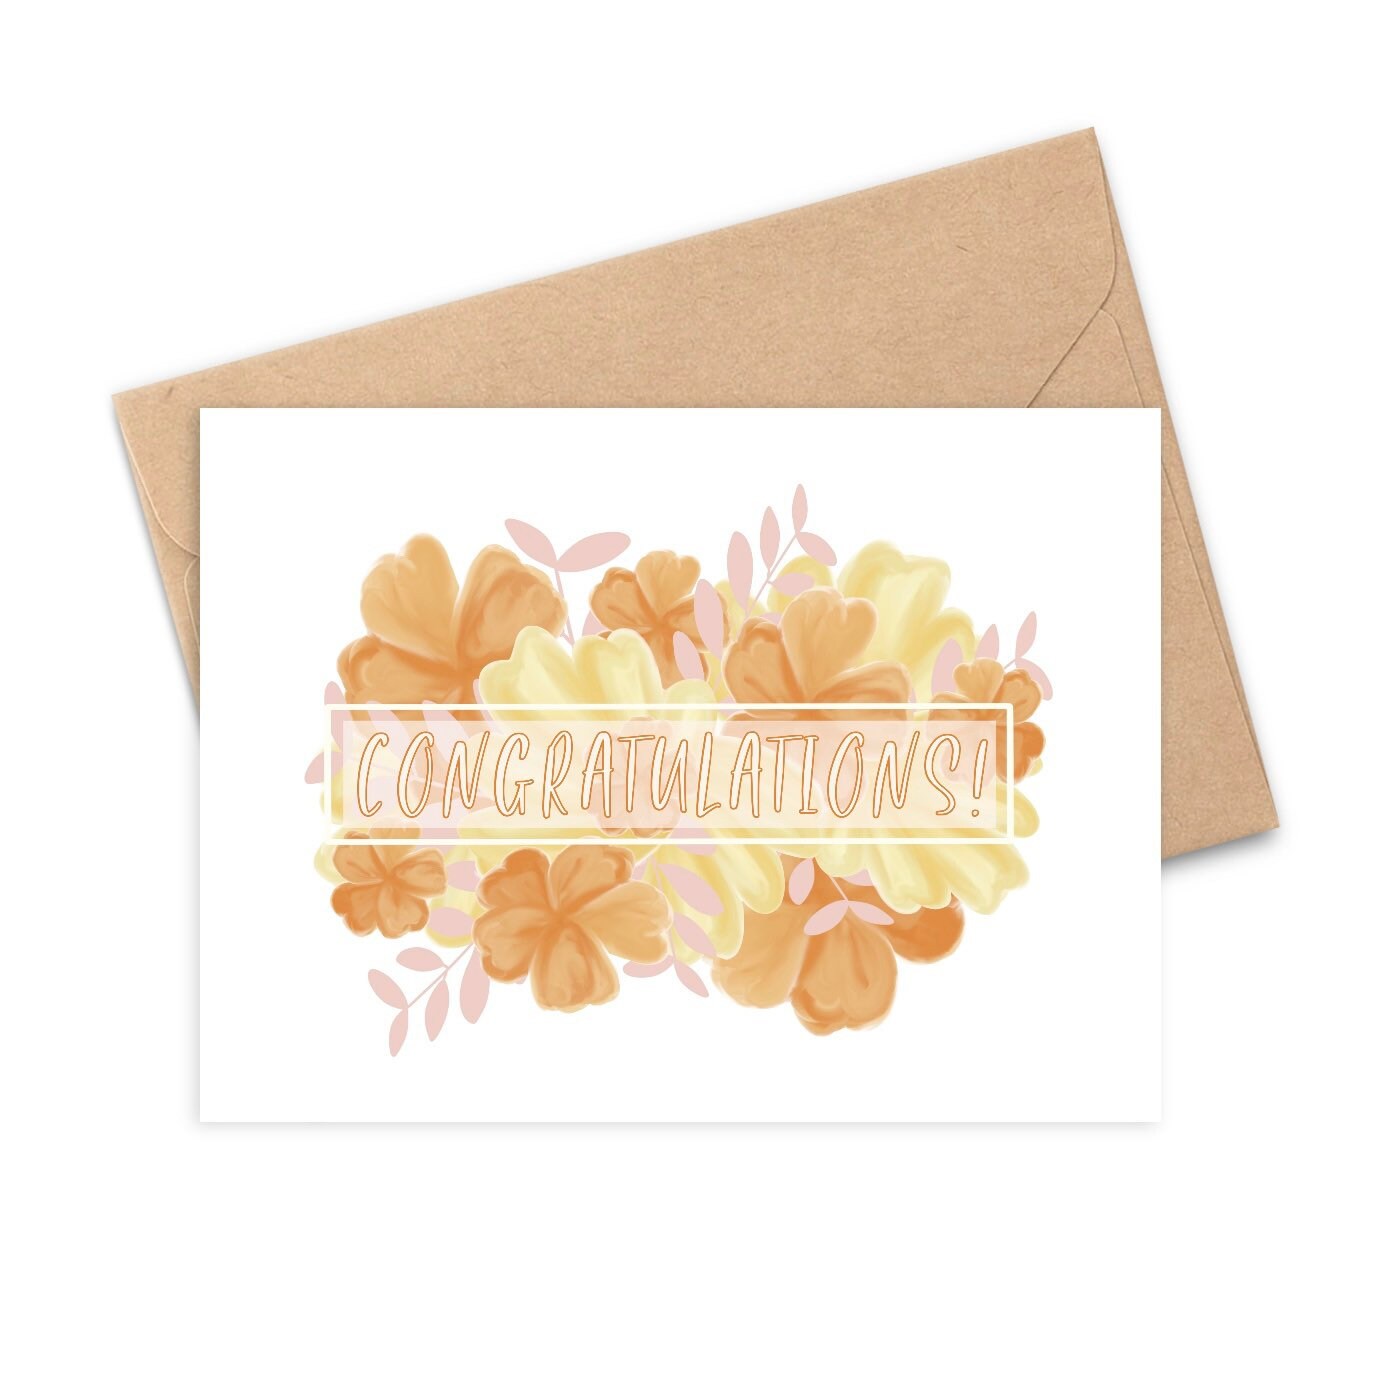 This cute "Congratulations" greeting card contains a collage of digitally hand-drawn flowers and leaves in tranquil shades of orange, pink and yellow - it's the perfect way to wish someone congratulations for any occasion!